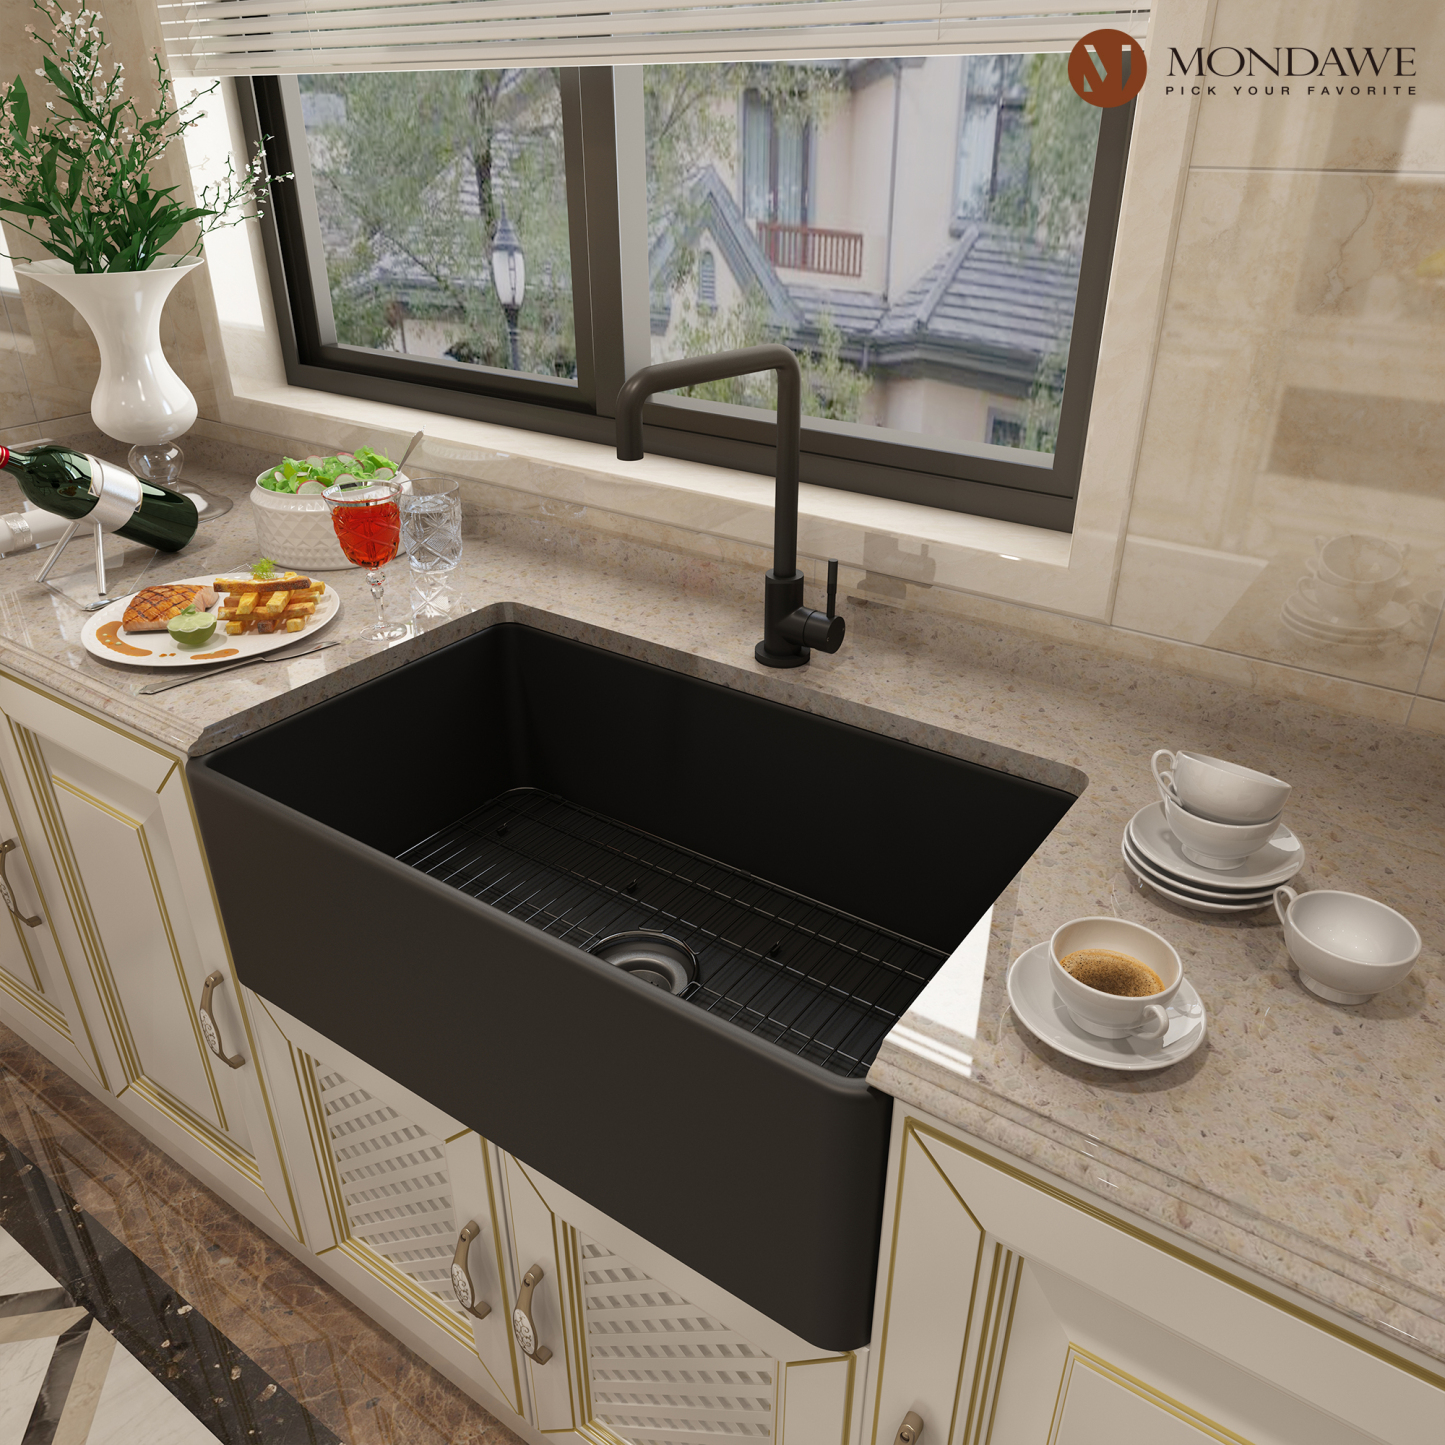 Farmhouse 33 in single bowl fireclay kitchen sink comes with high-arc kitchen faucet-Mondawe